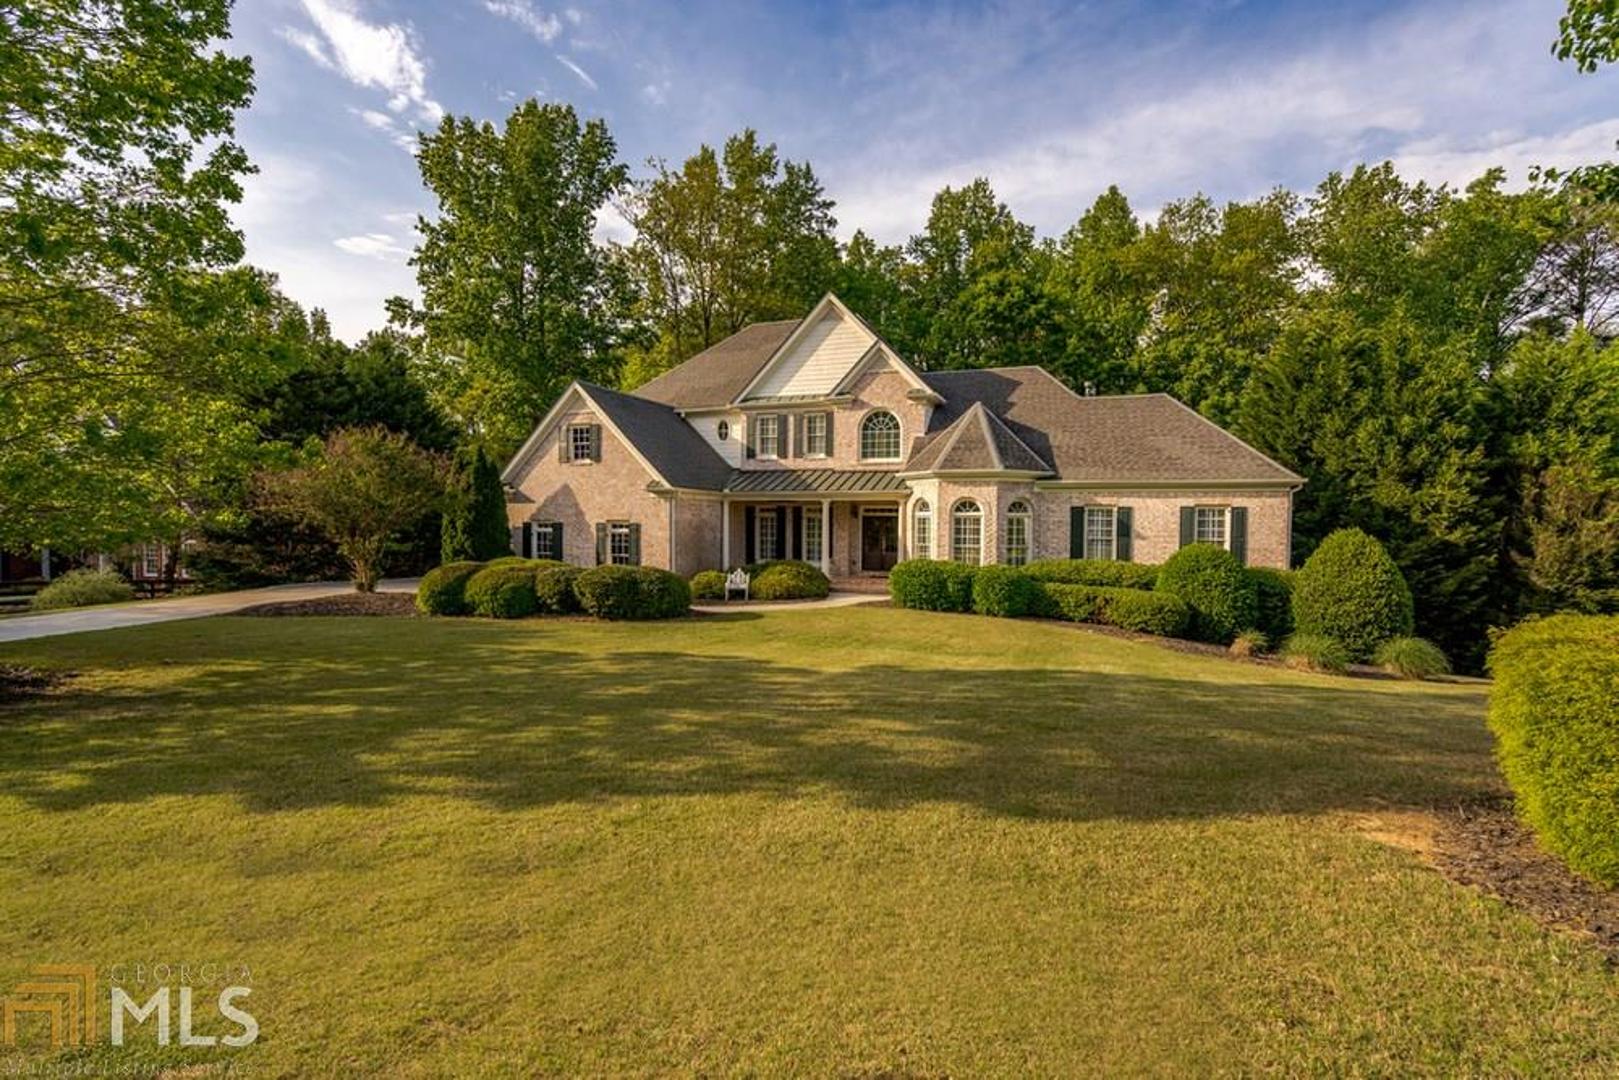 TOTAL TRANSFORMATION !!  Executive 4 sided brick home nestled in nature on over an acre of  privacy